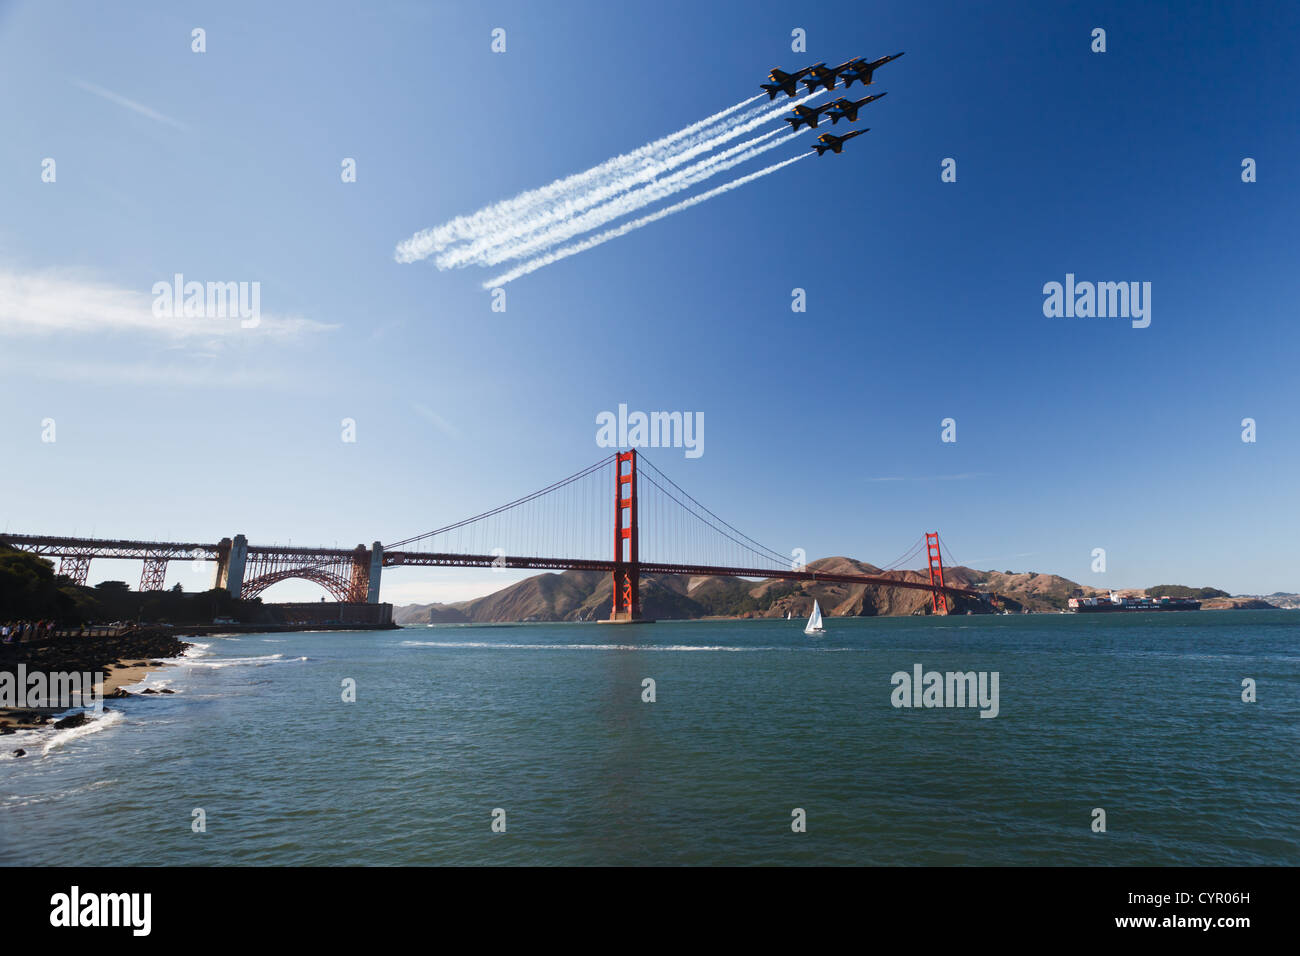 6 Fighter jets leave vapor trail as they fly over the Golden Gate Bridge in precision delta wing formation fleet week air show Stock Photo